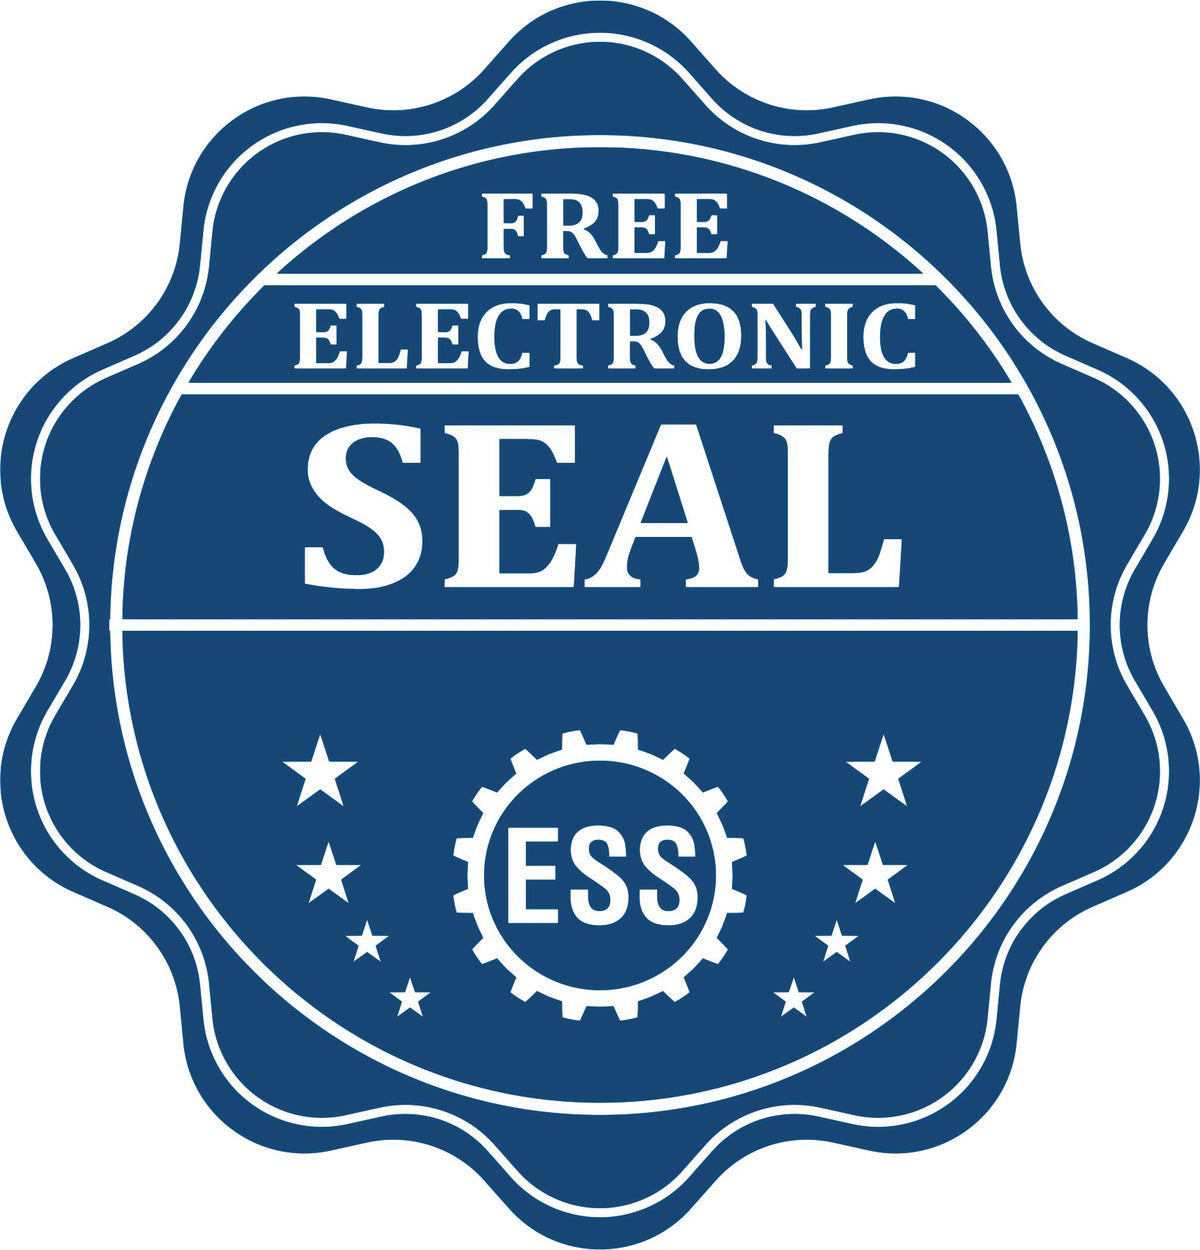 A badge showing a free electronic seal for the Hybrid Montana Geologist Seal with stars and the ESS gear on the emblem.